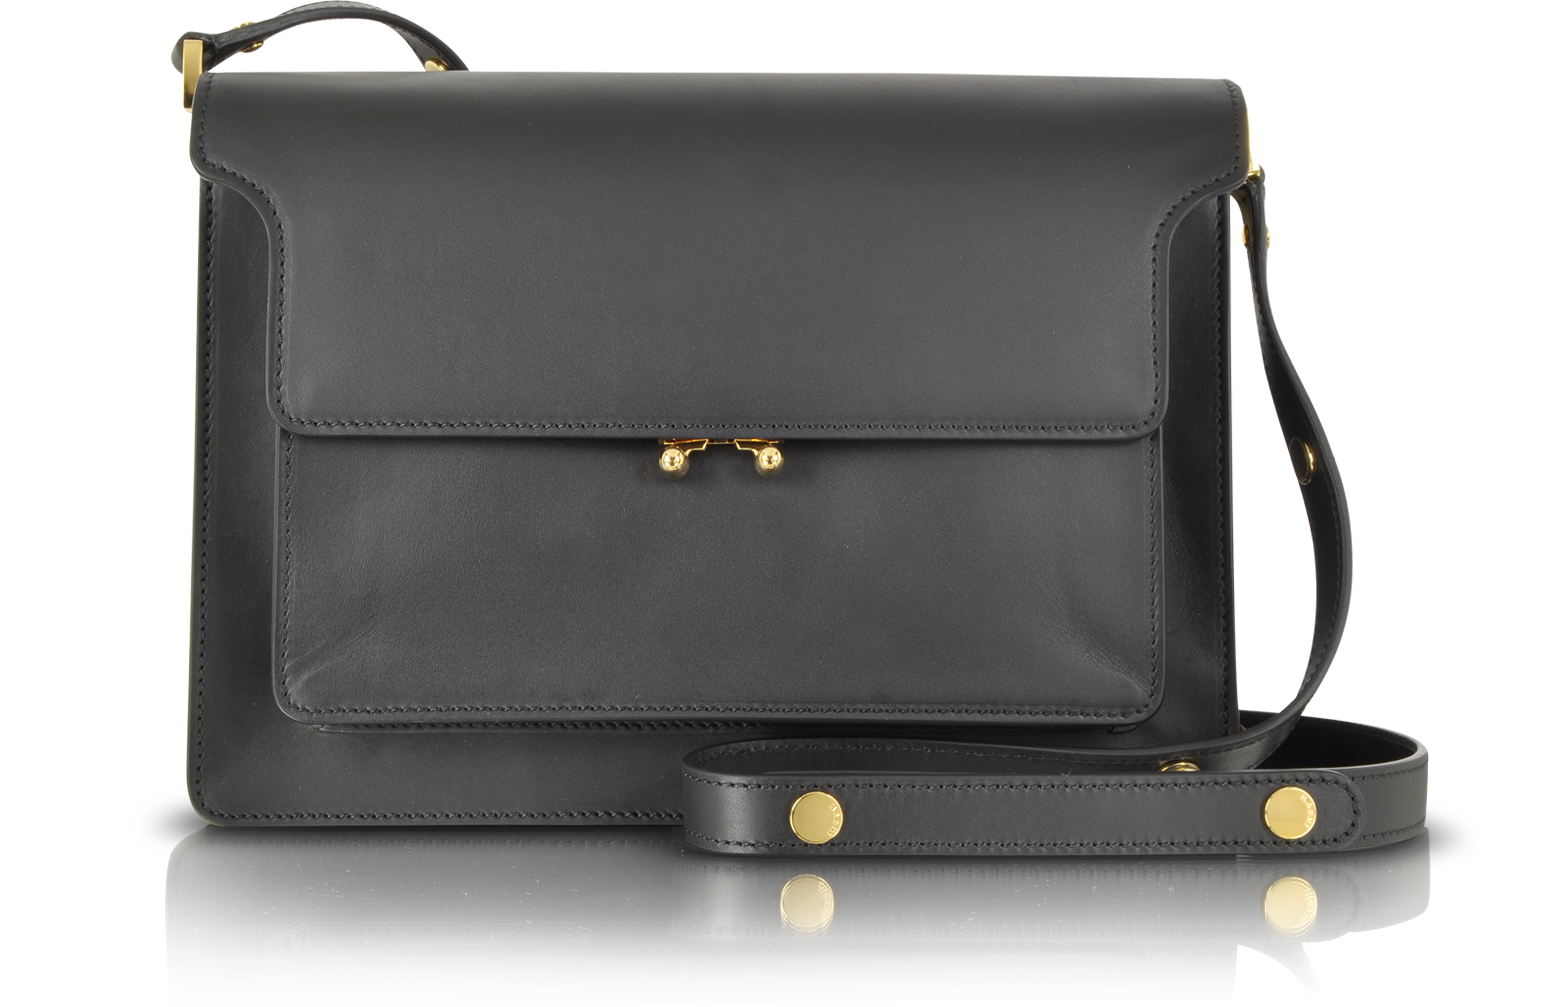 Marni Large Leather Trunk Bag at FORZIERI